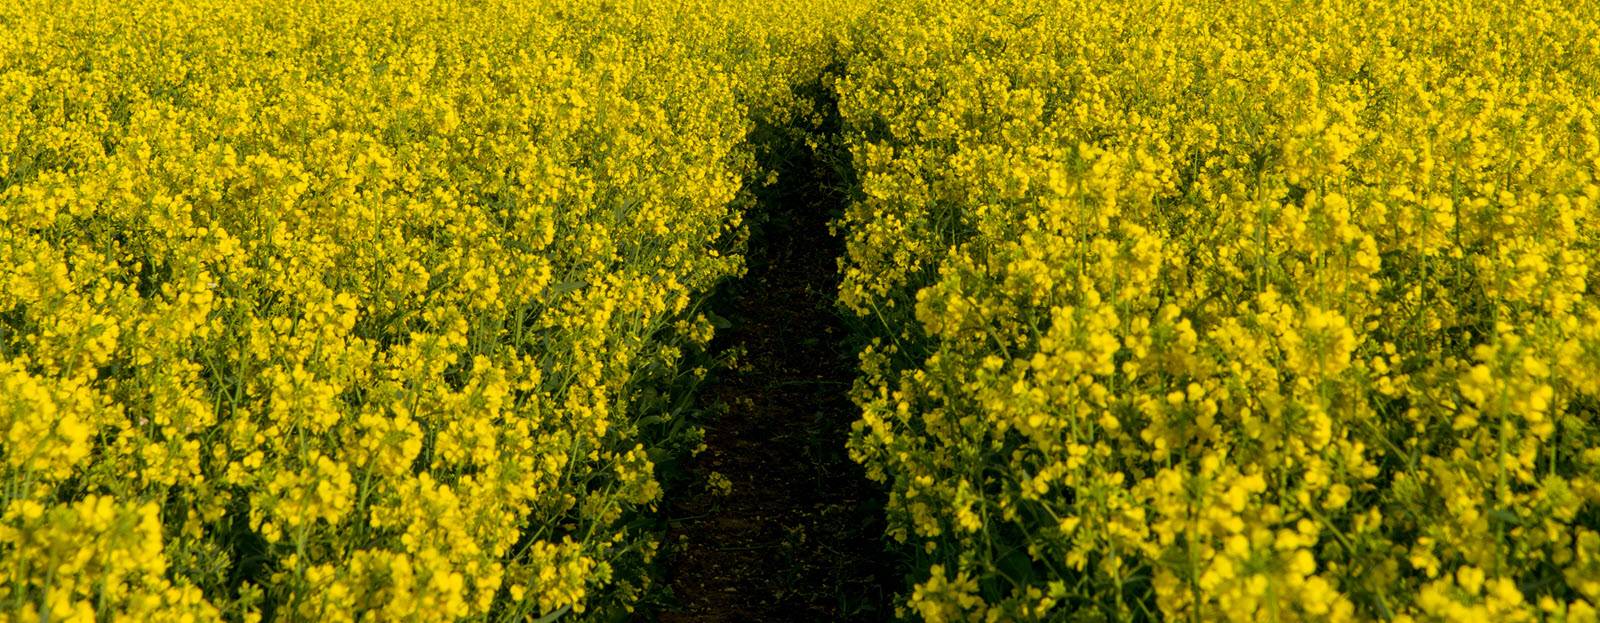 High-Protein canola seeds get boost for market